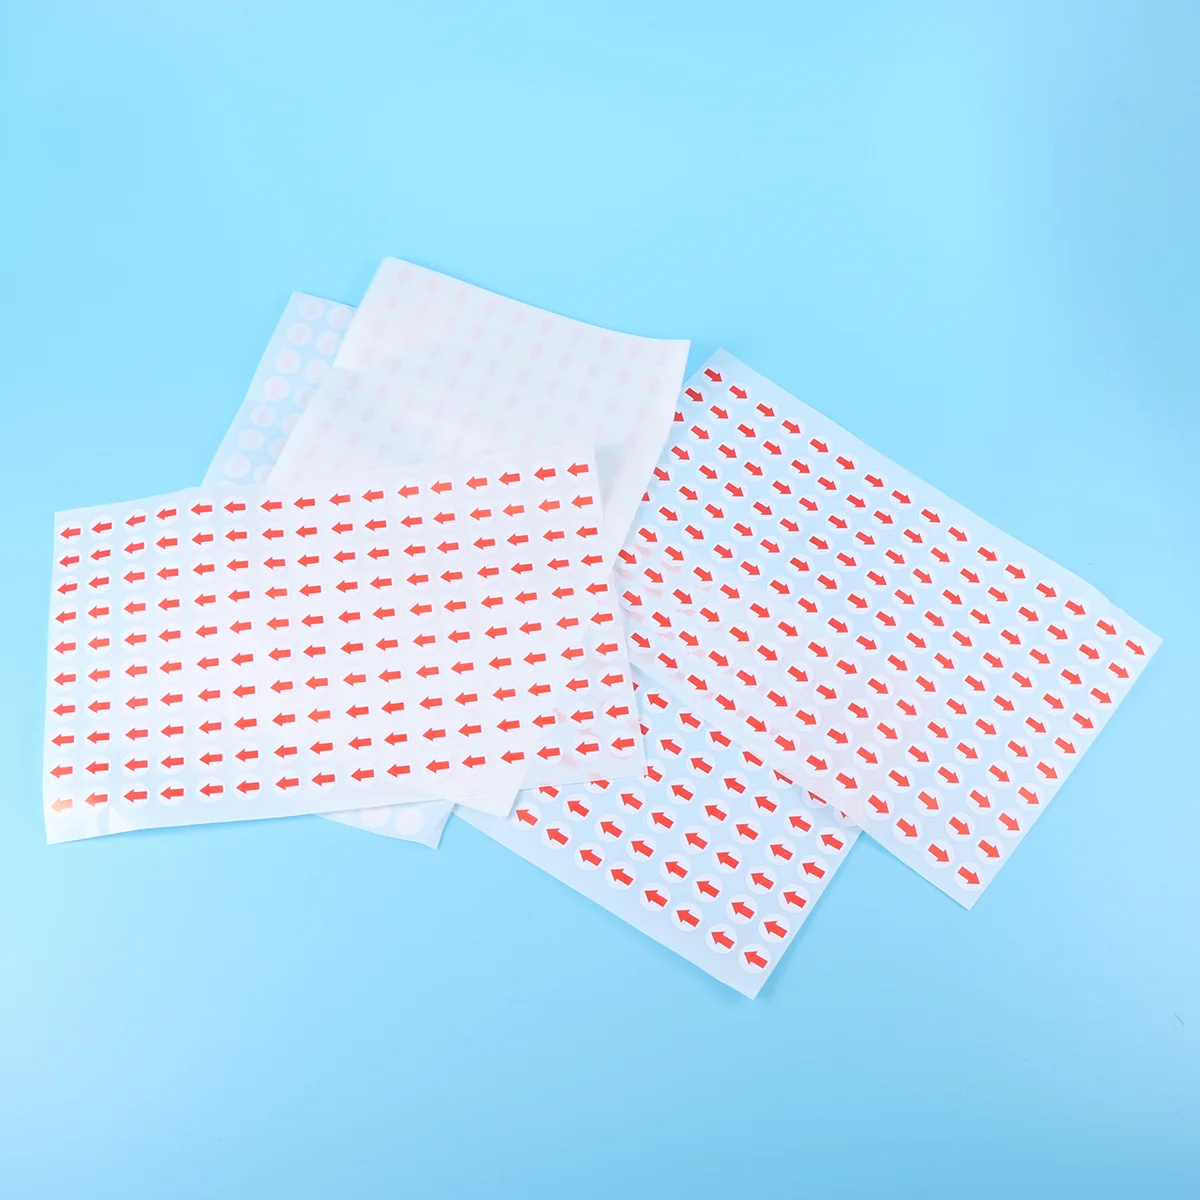 

3200PCS 10mm Self Adhesive Sticky Red Labels Removable Small Circle Dot Stickers Product Inspection Defect Indicator Tape